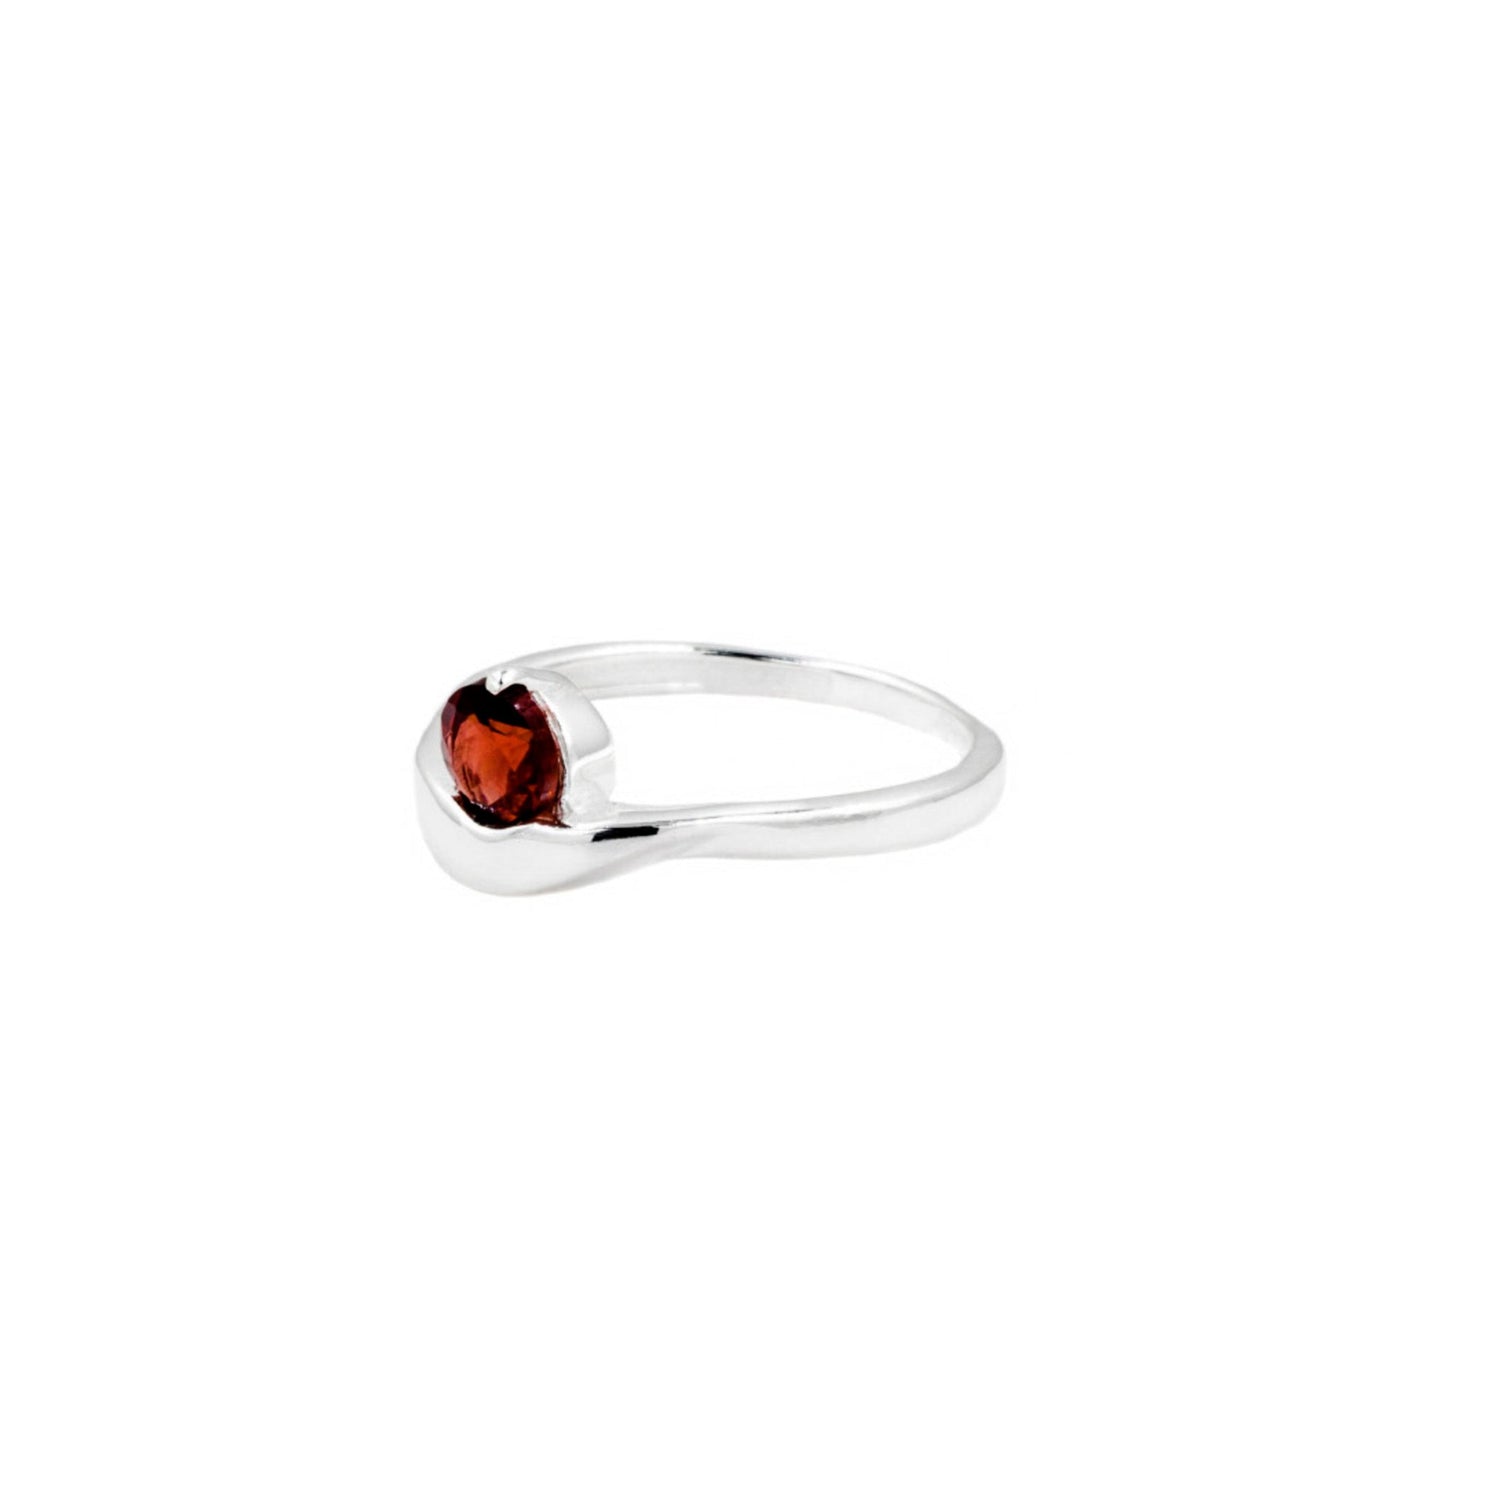 Garnet Sterling Silver Ring - Twisted Earth Artistry